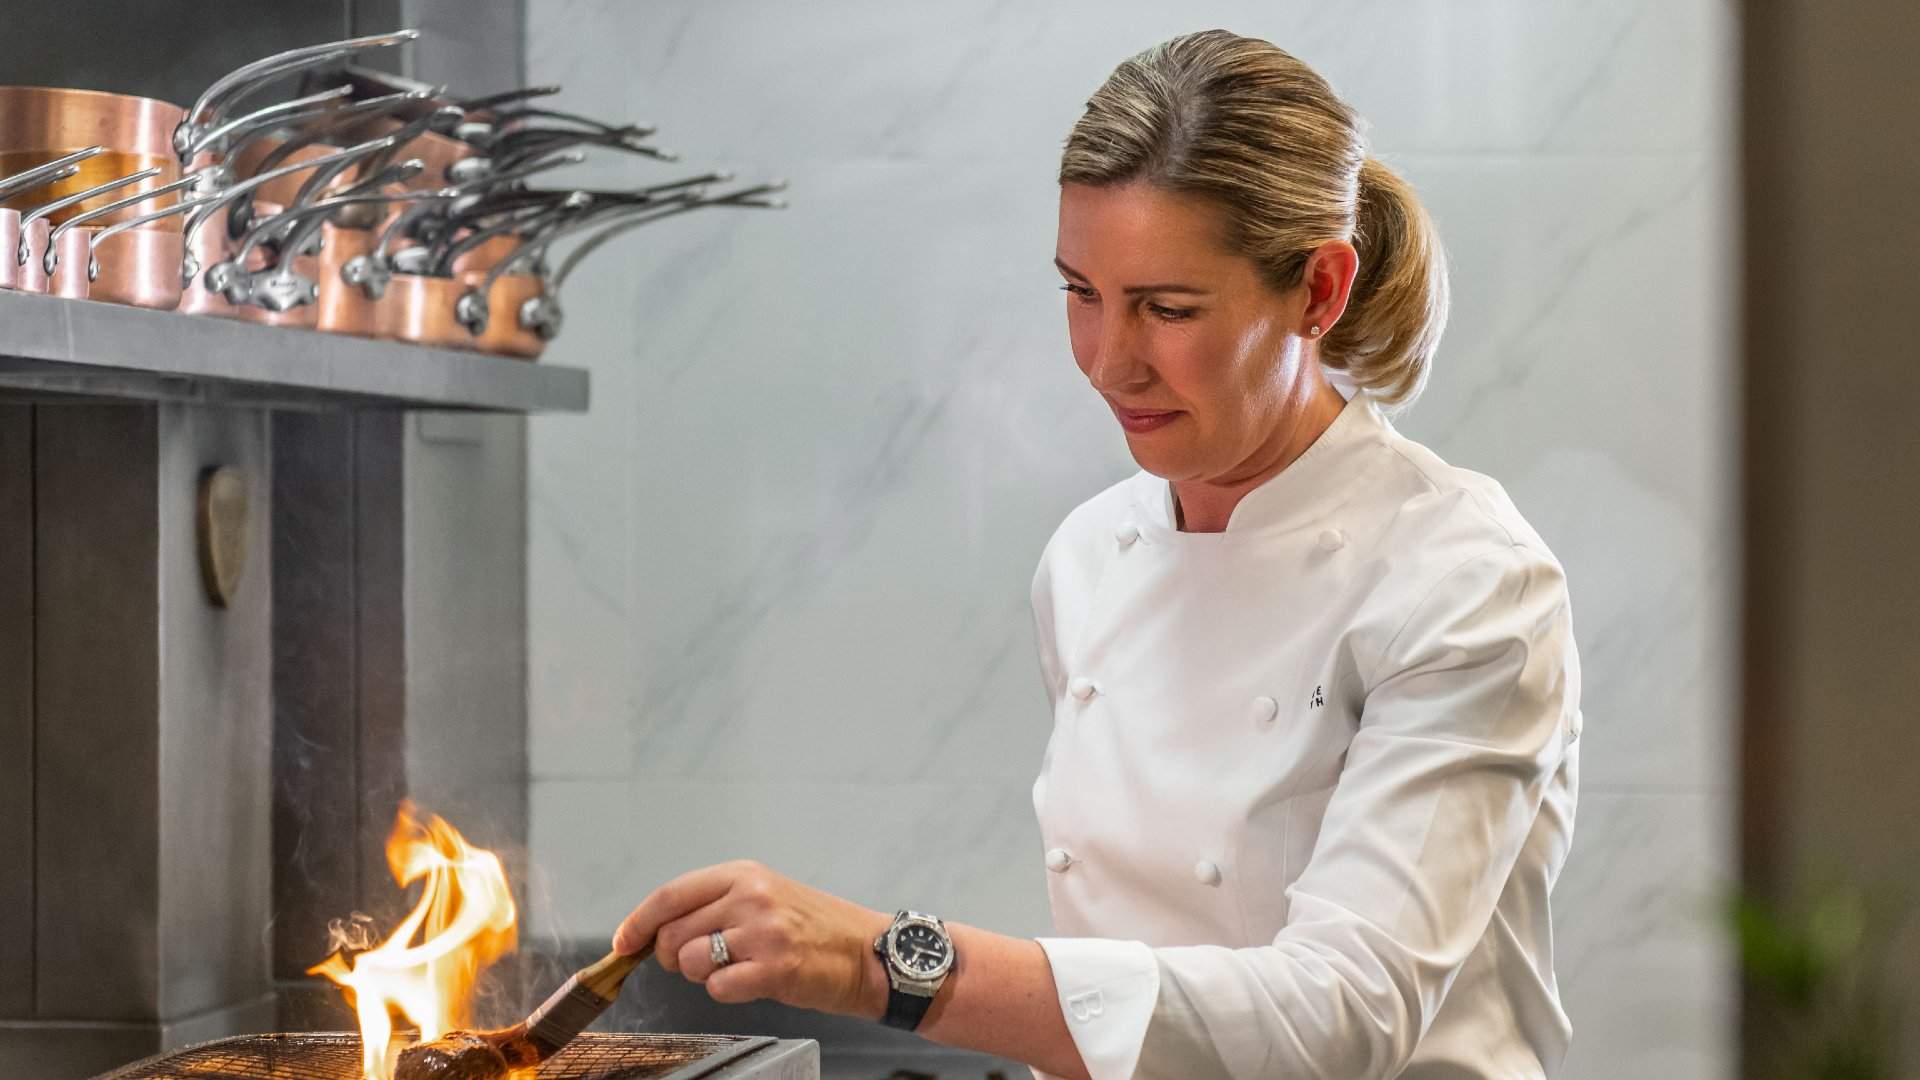 Oncore Is the Crown Sydney's New Sky-High Restaurant with World-Renowned Chef Clare Smyth at the Helm